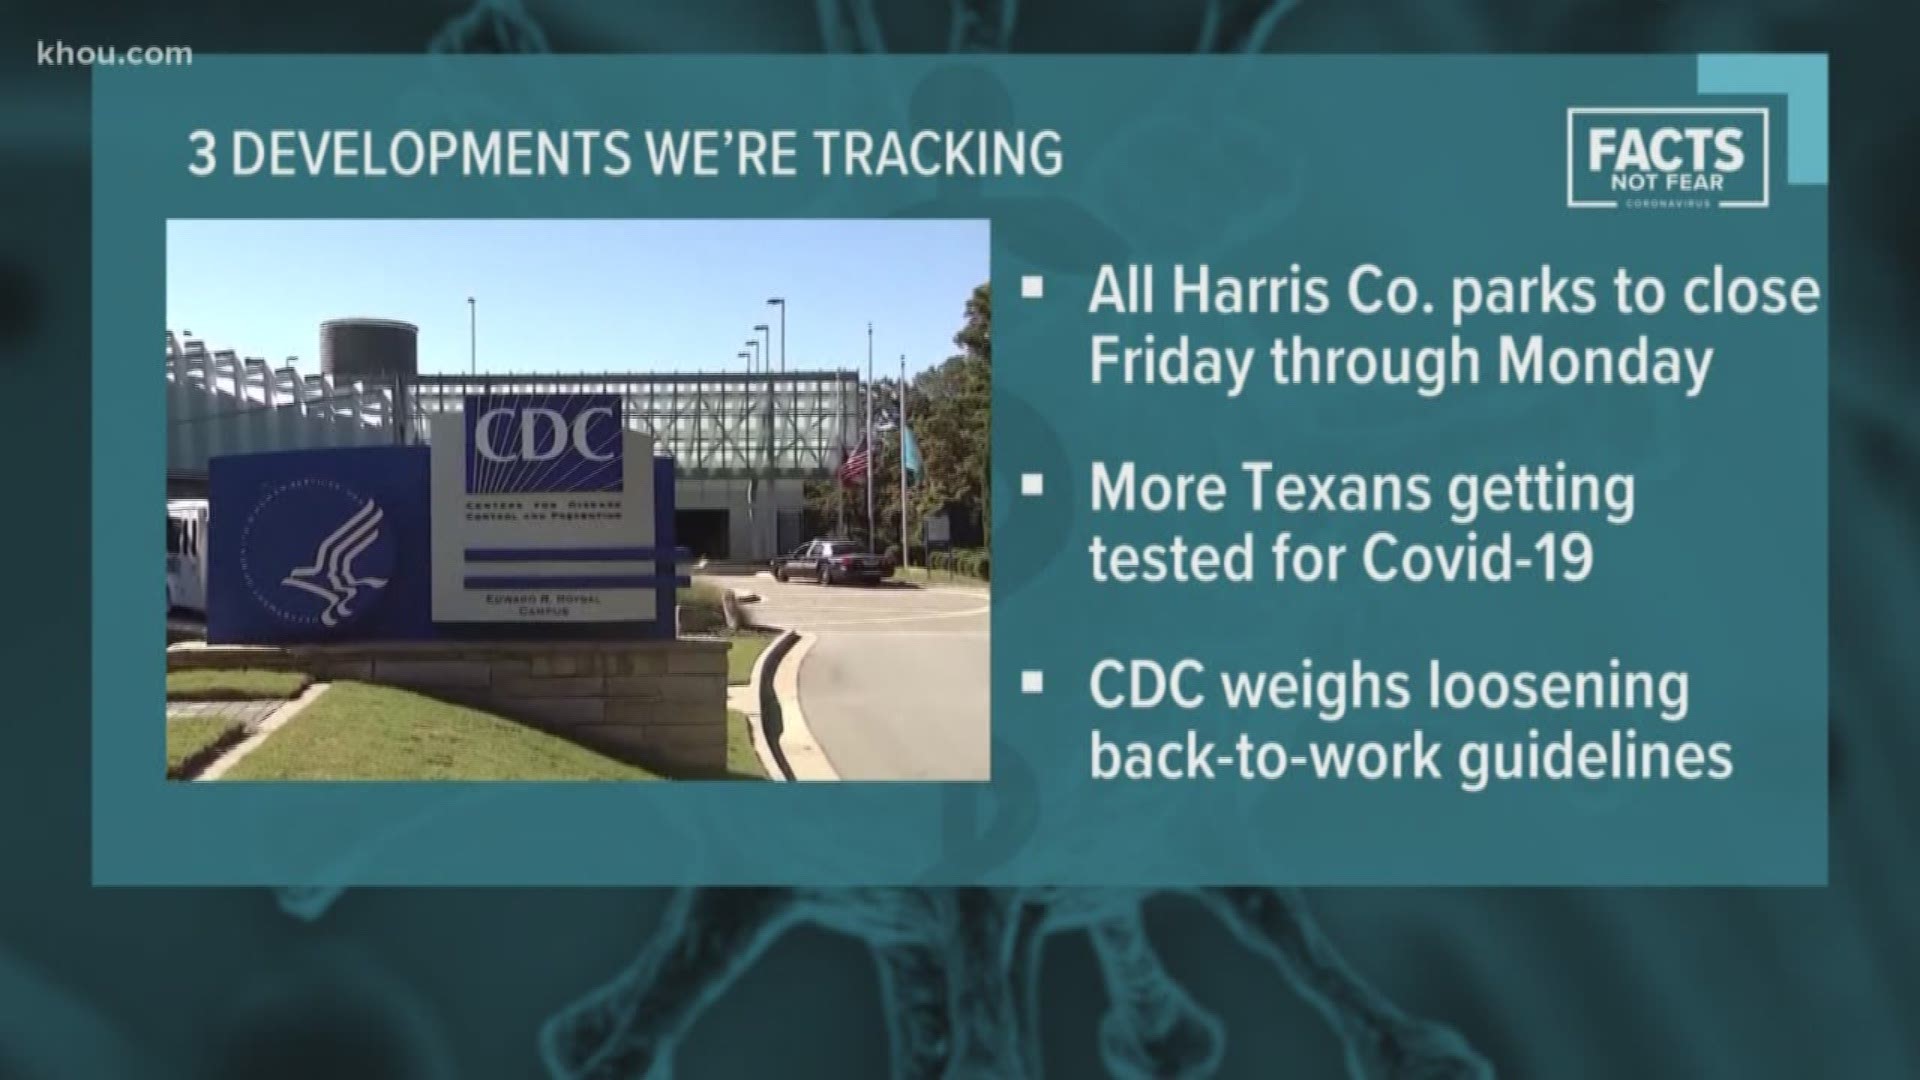 Harris County is closing its parks for Easter weekend, more Texans are getting tested and the CDC is weighing loosening back-to-work guidelines.